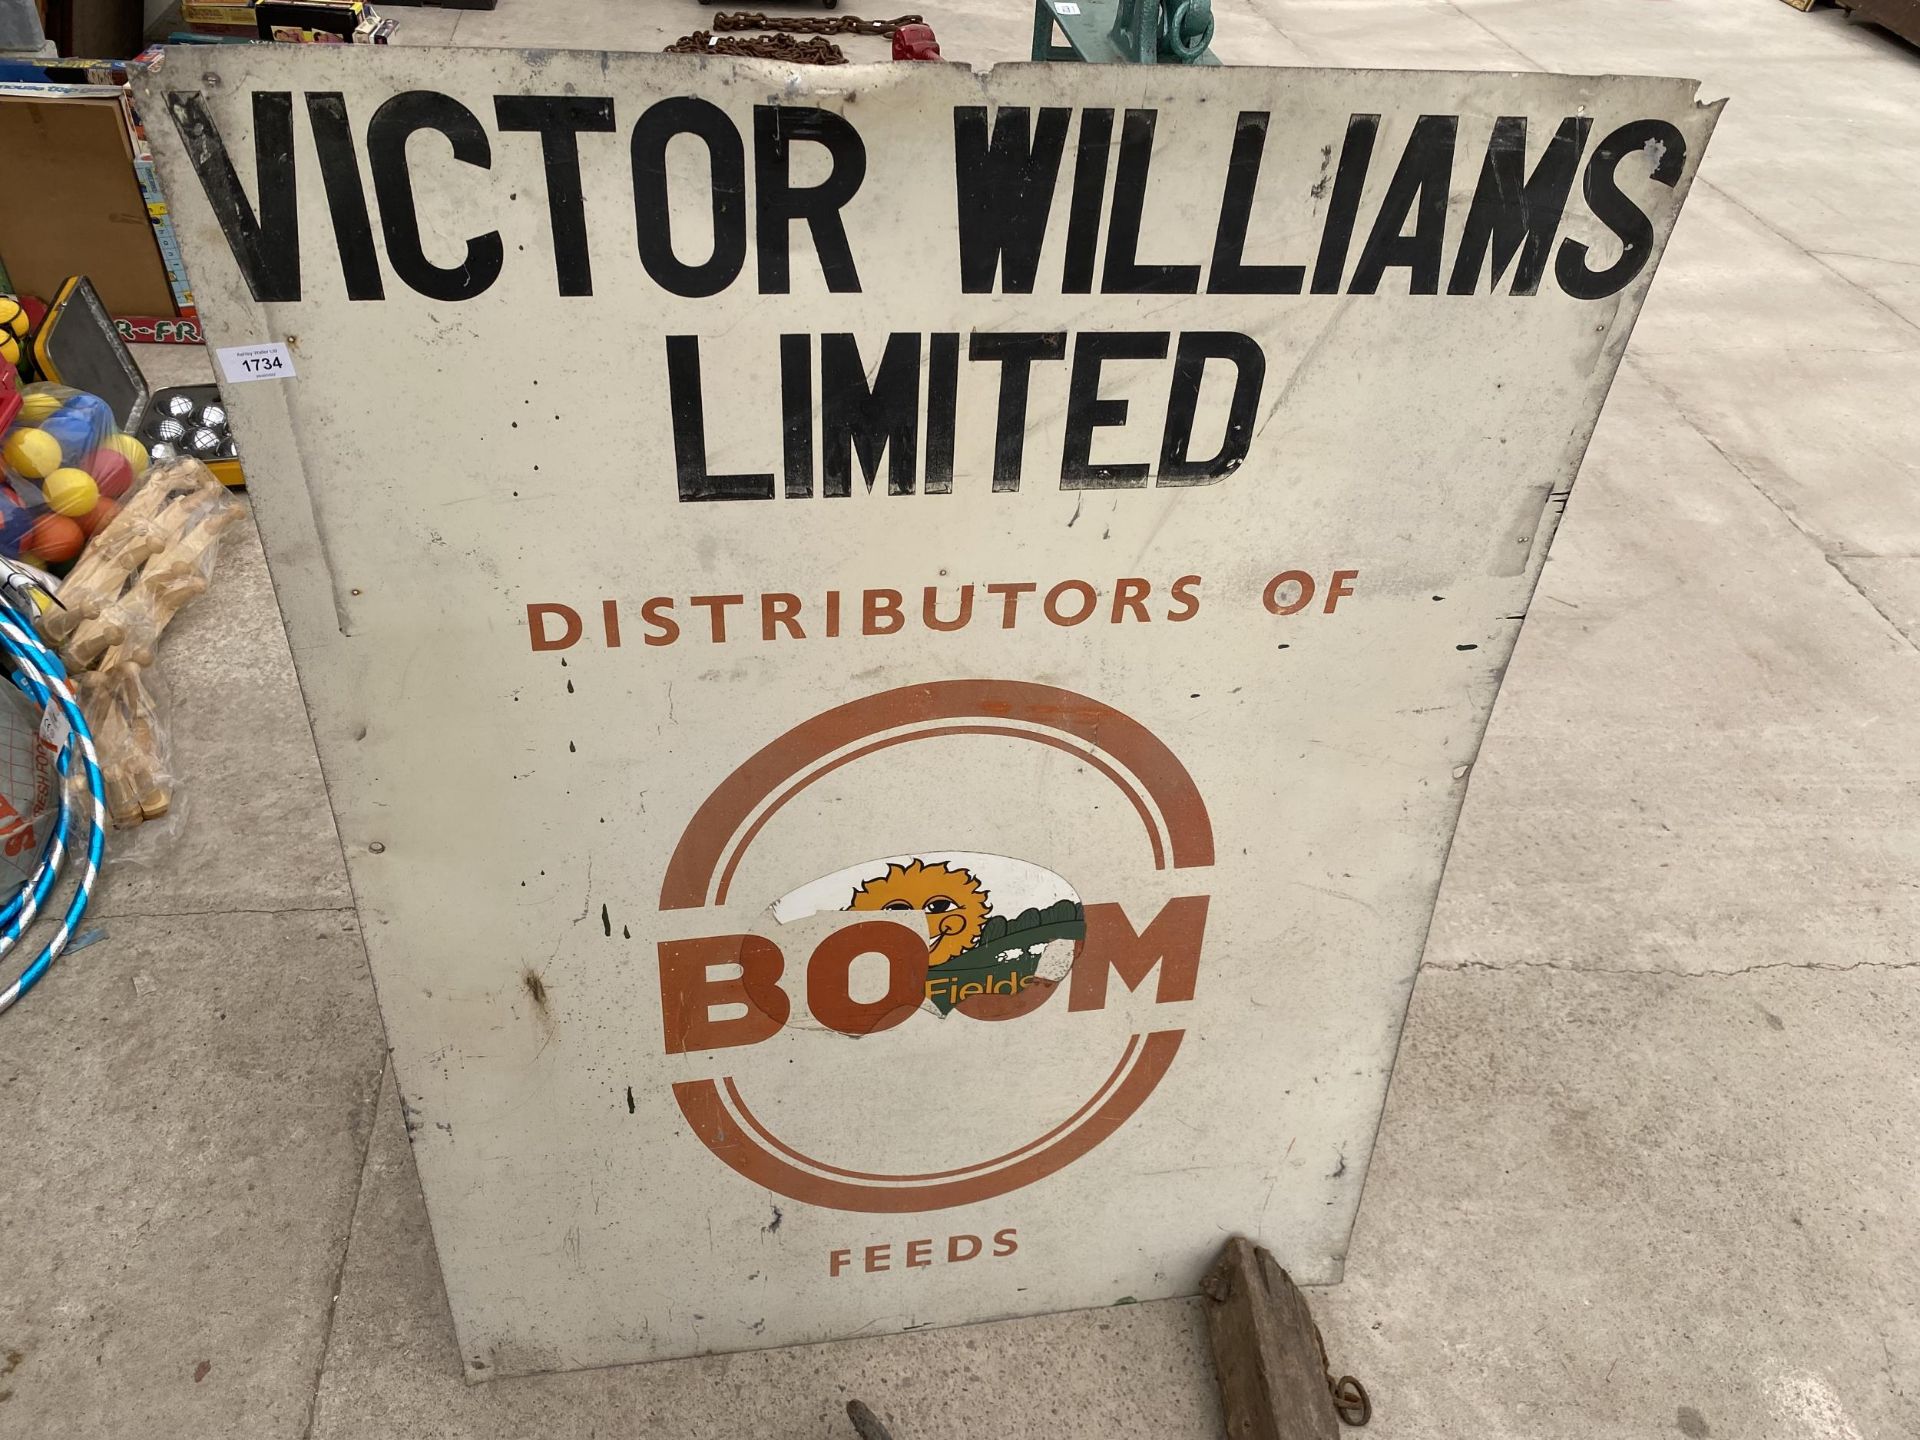 A LARGE 'VICTOR WILLIAMS LIMITED' SIGN (91CM X 122CM)